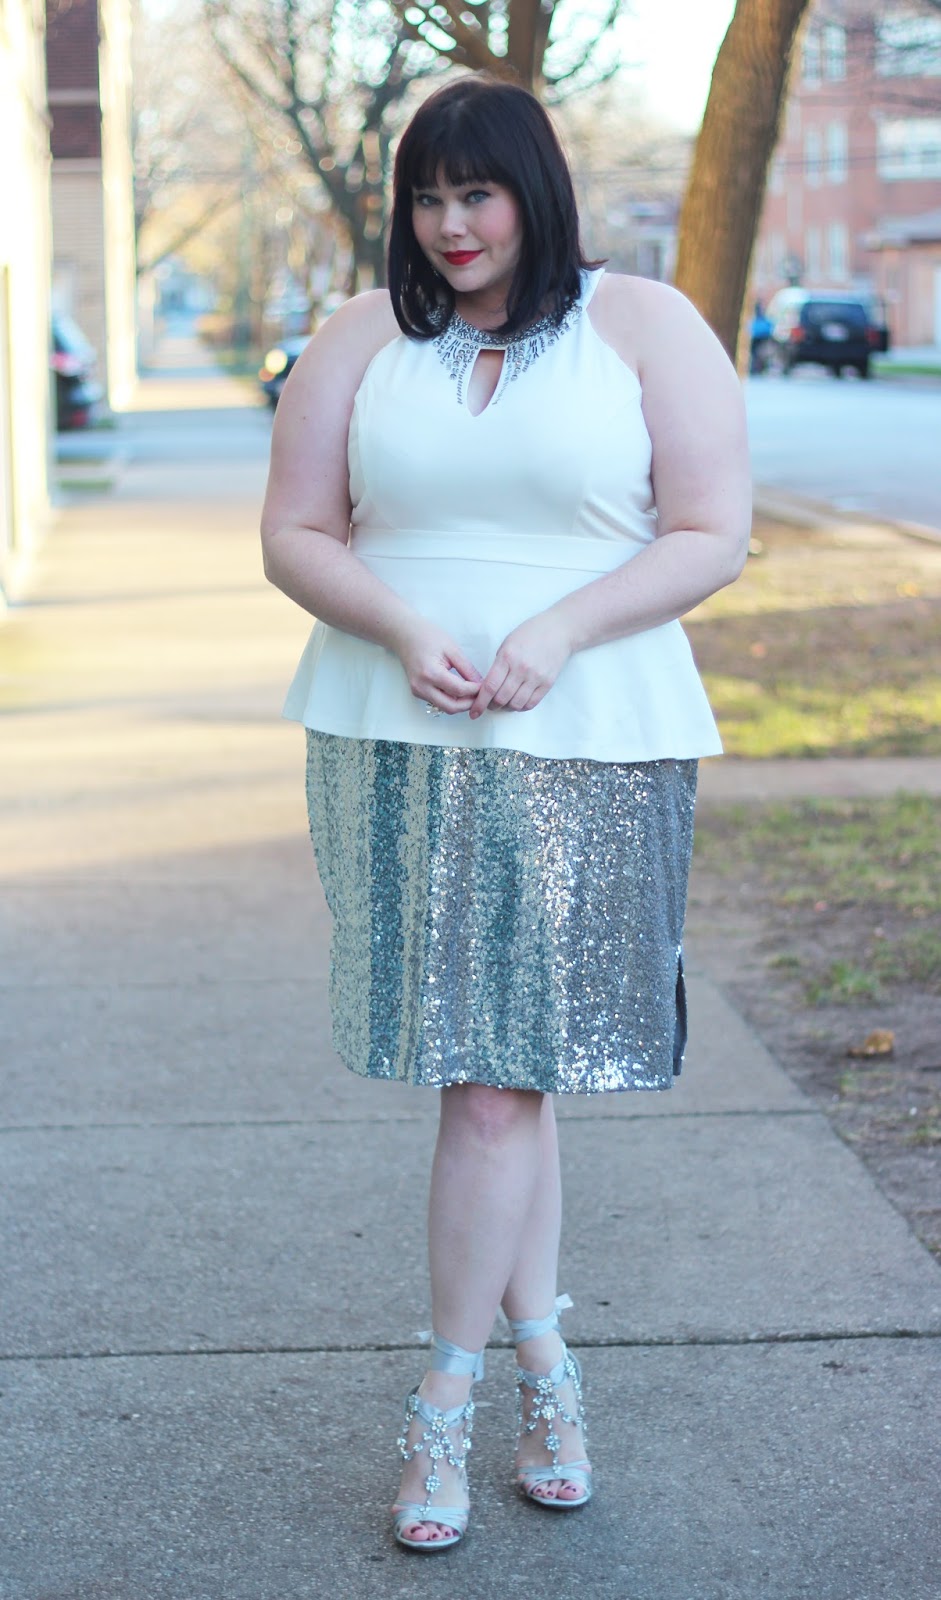 Winter White: Plus Size Faux Fur and Sequins from Fullbeauty.com